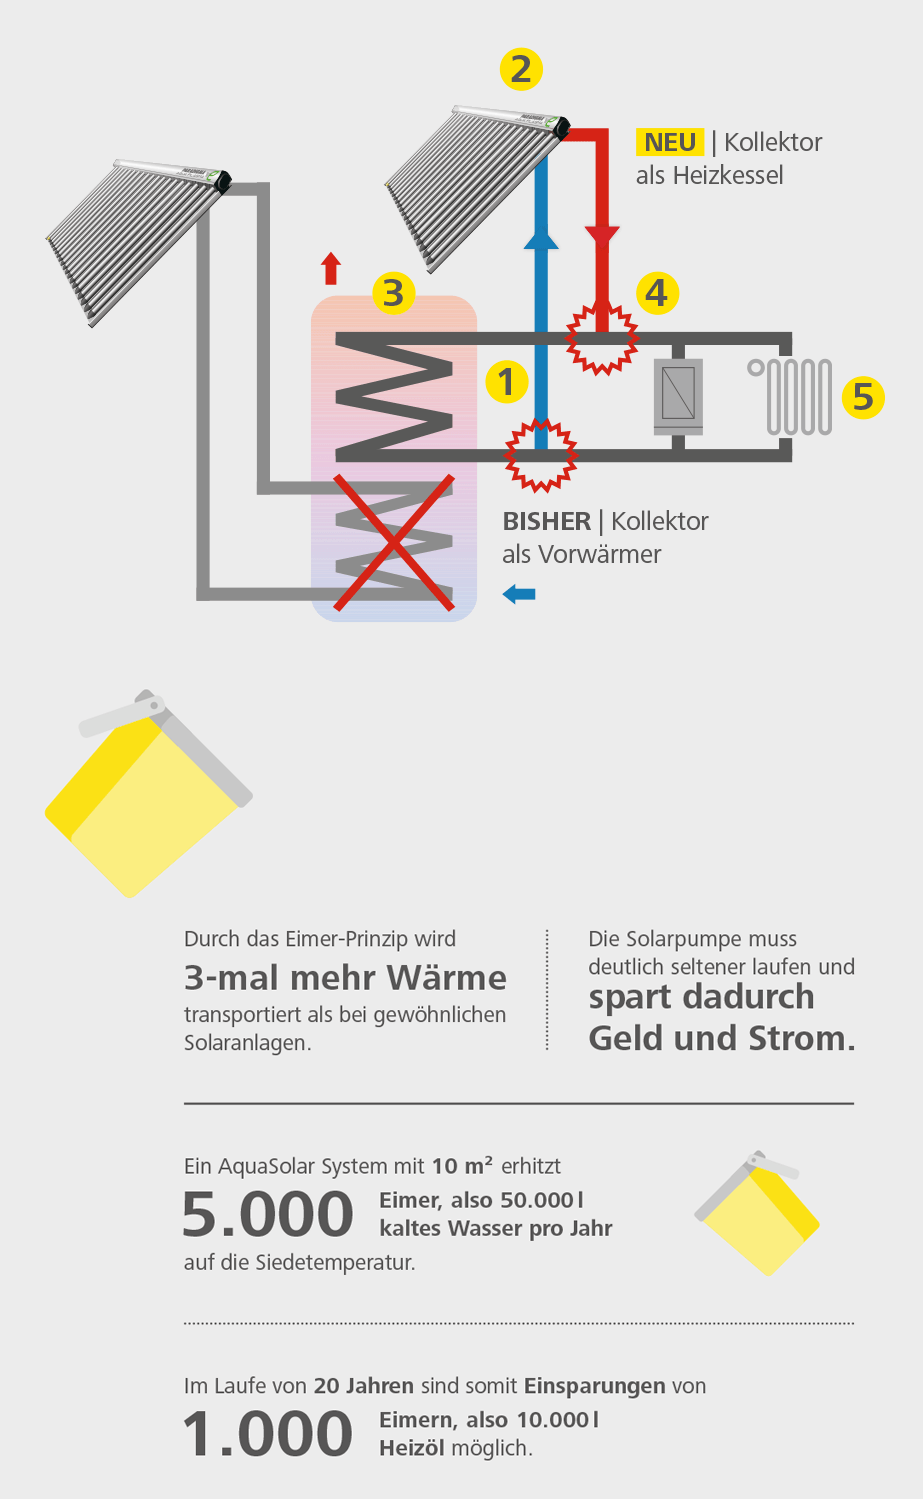 https://www.paradigma.de/wp-content/uploads/2019/05/funktionsweise-solarthermie-mit-aquasolar-system.png